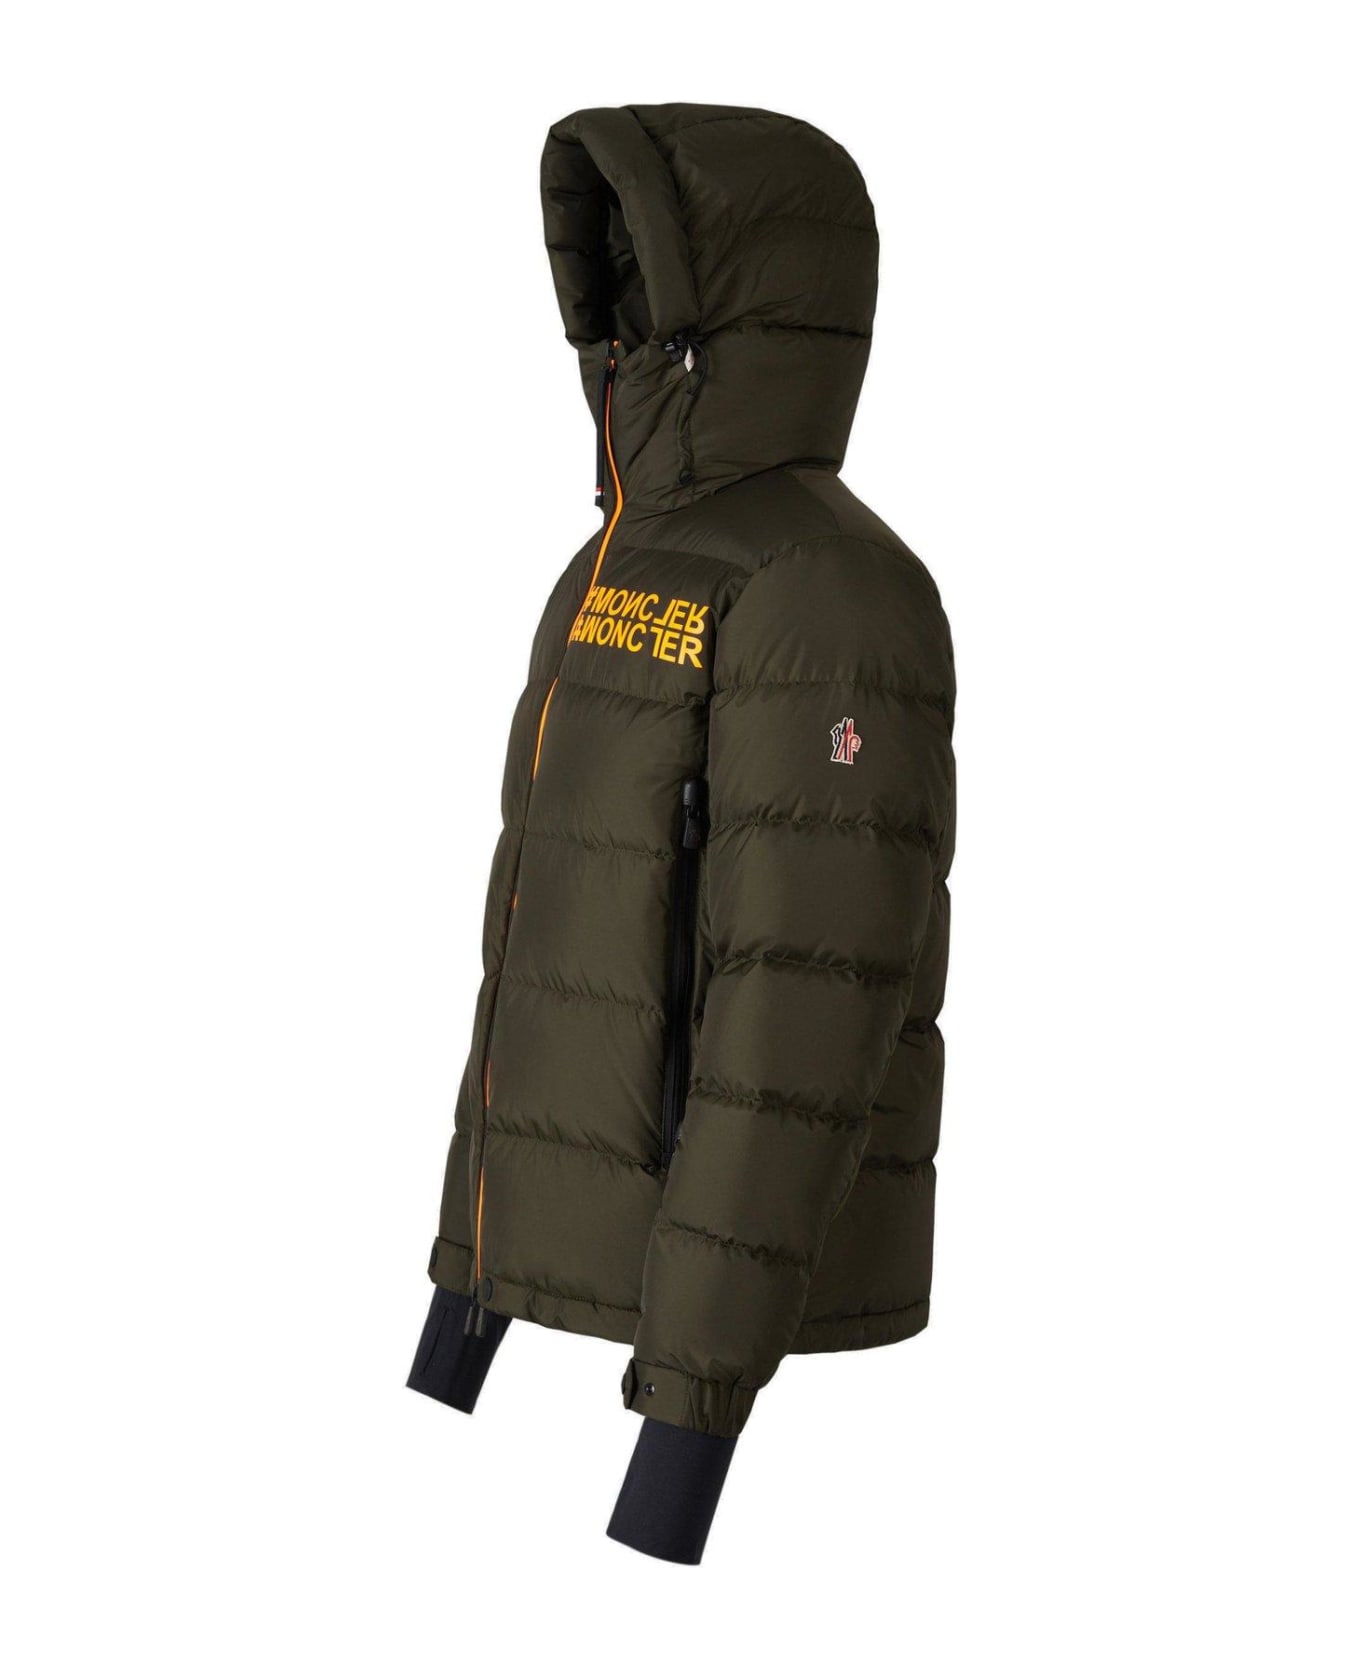 Moncler Grenoble Zip-up Padded Jacket - MILITARY GREEN